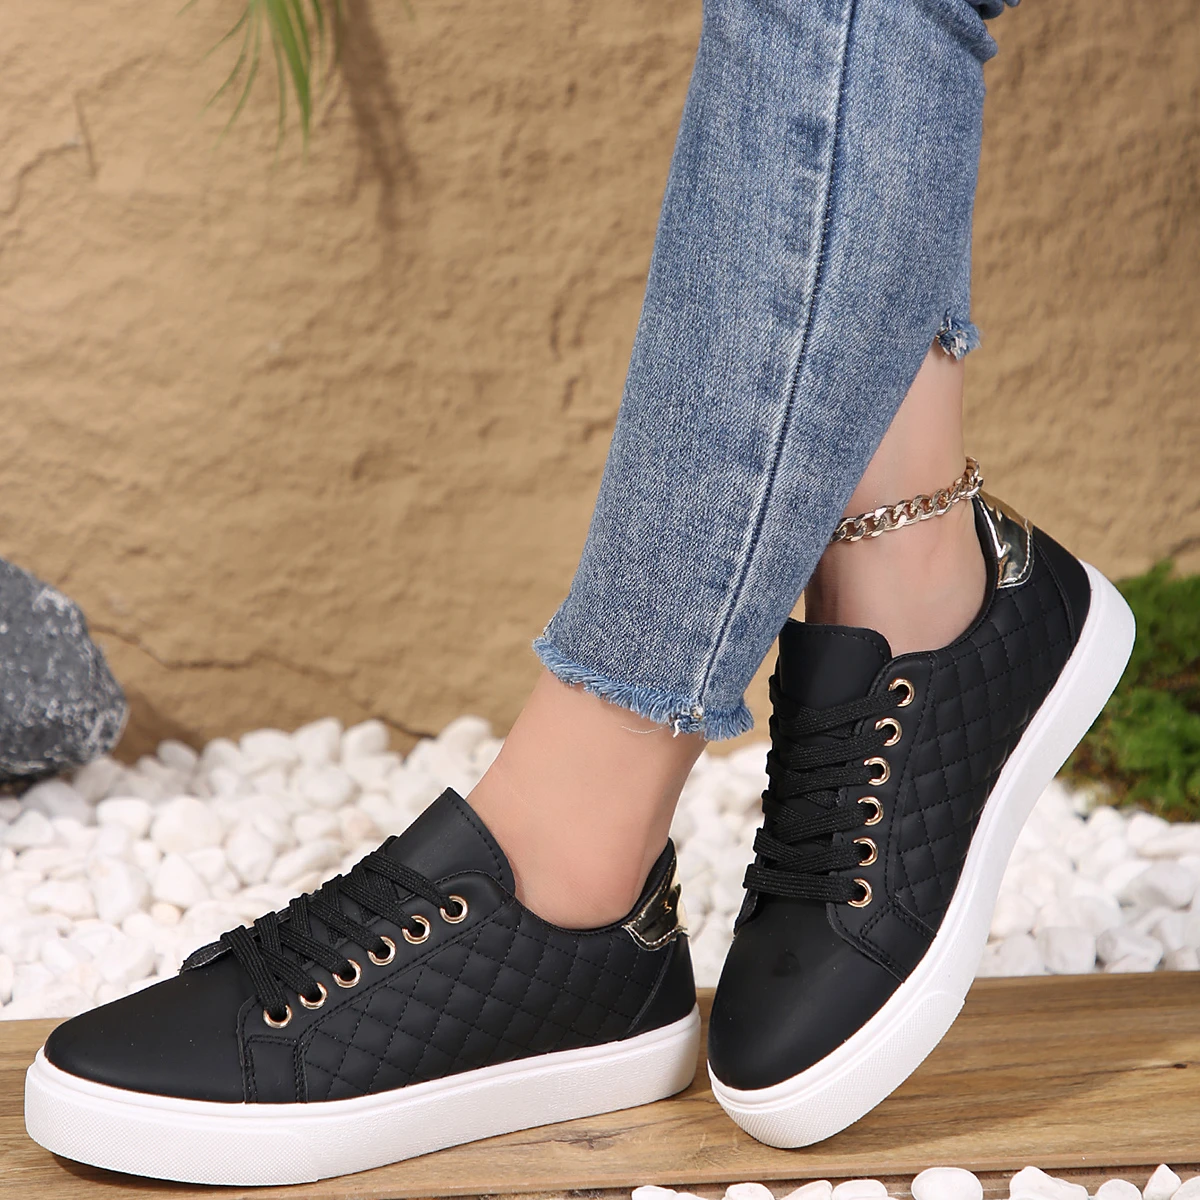 

Women Sneakers New Fashion Breathable Flat Sneakers Woman Soft Sole Walking Shoes for Women Casual Sneakers Zapatos De Mujer